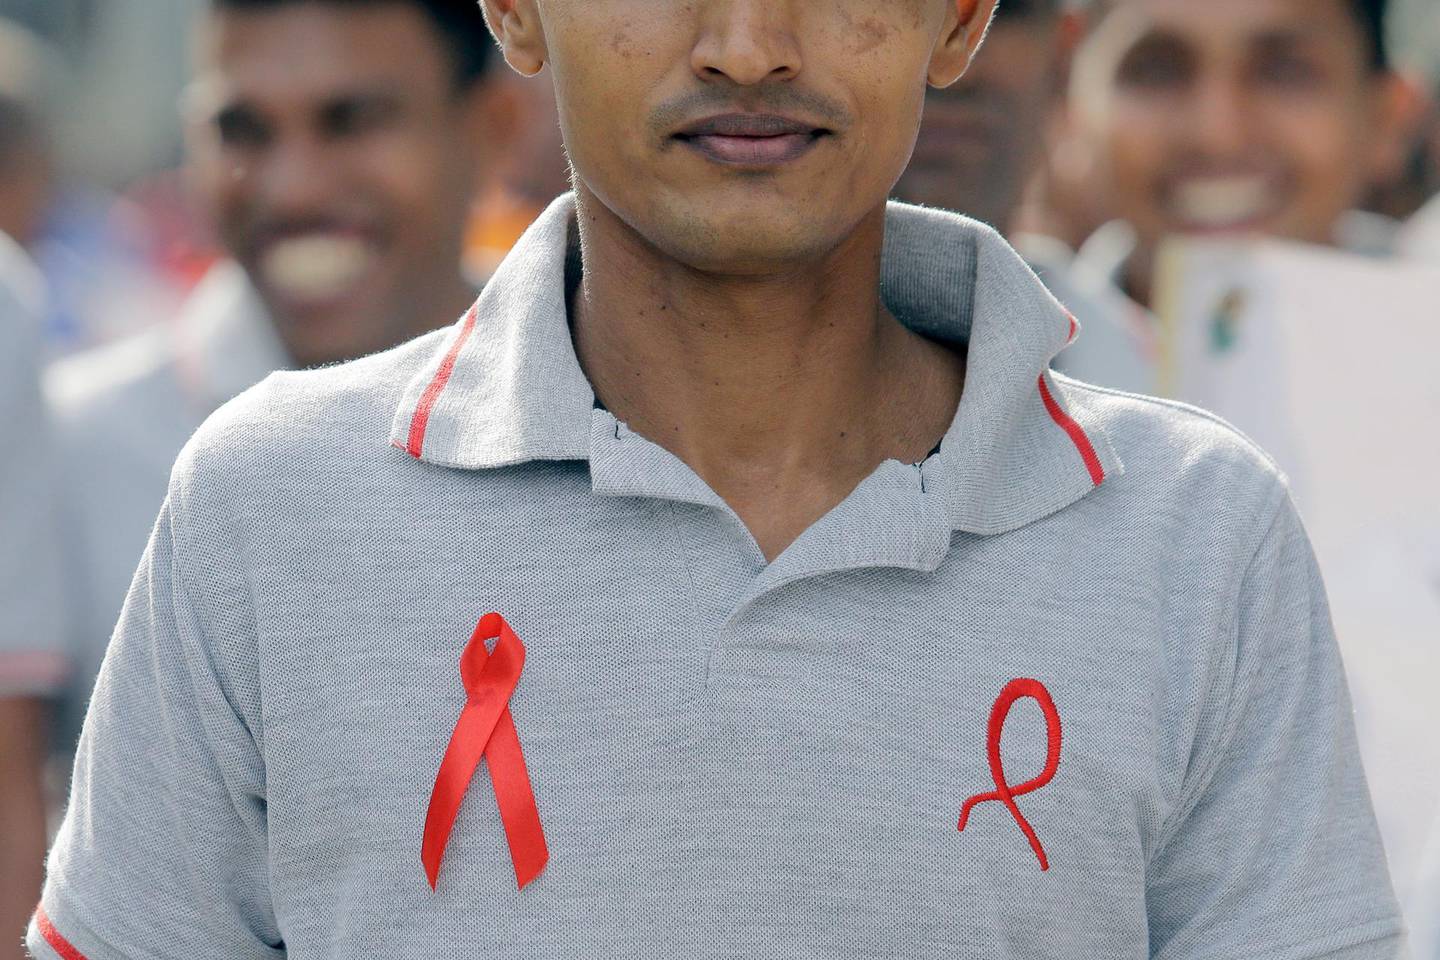 epa08034327 Sri Lankan health workers display red ribbons, an international symbol of human immunodeficiency virus infection and acquired immune deficiency syndrome (HIV/AIDS) awareness, during an AIDS awareness march in Colombo, Sri Lanka, 30 November 2019. World AIDS Day is observed every year on 01 December to raise the awareness in the fight against HIV infection.  EPA/STRINGER